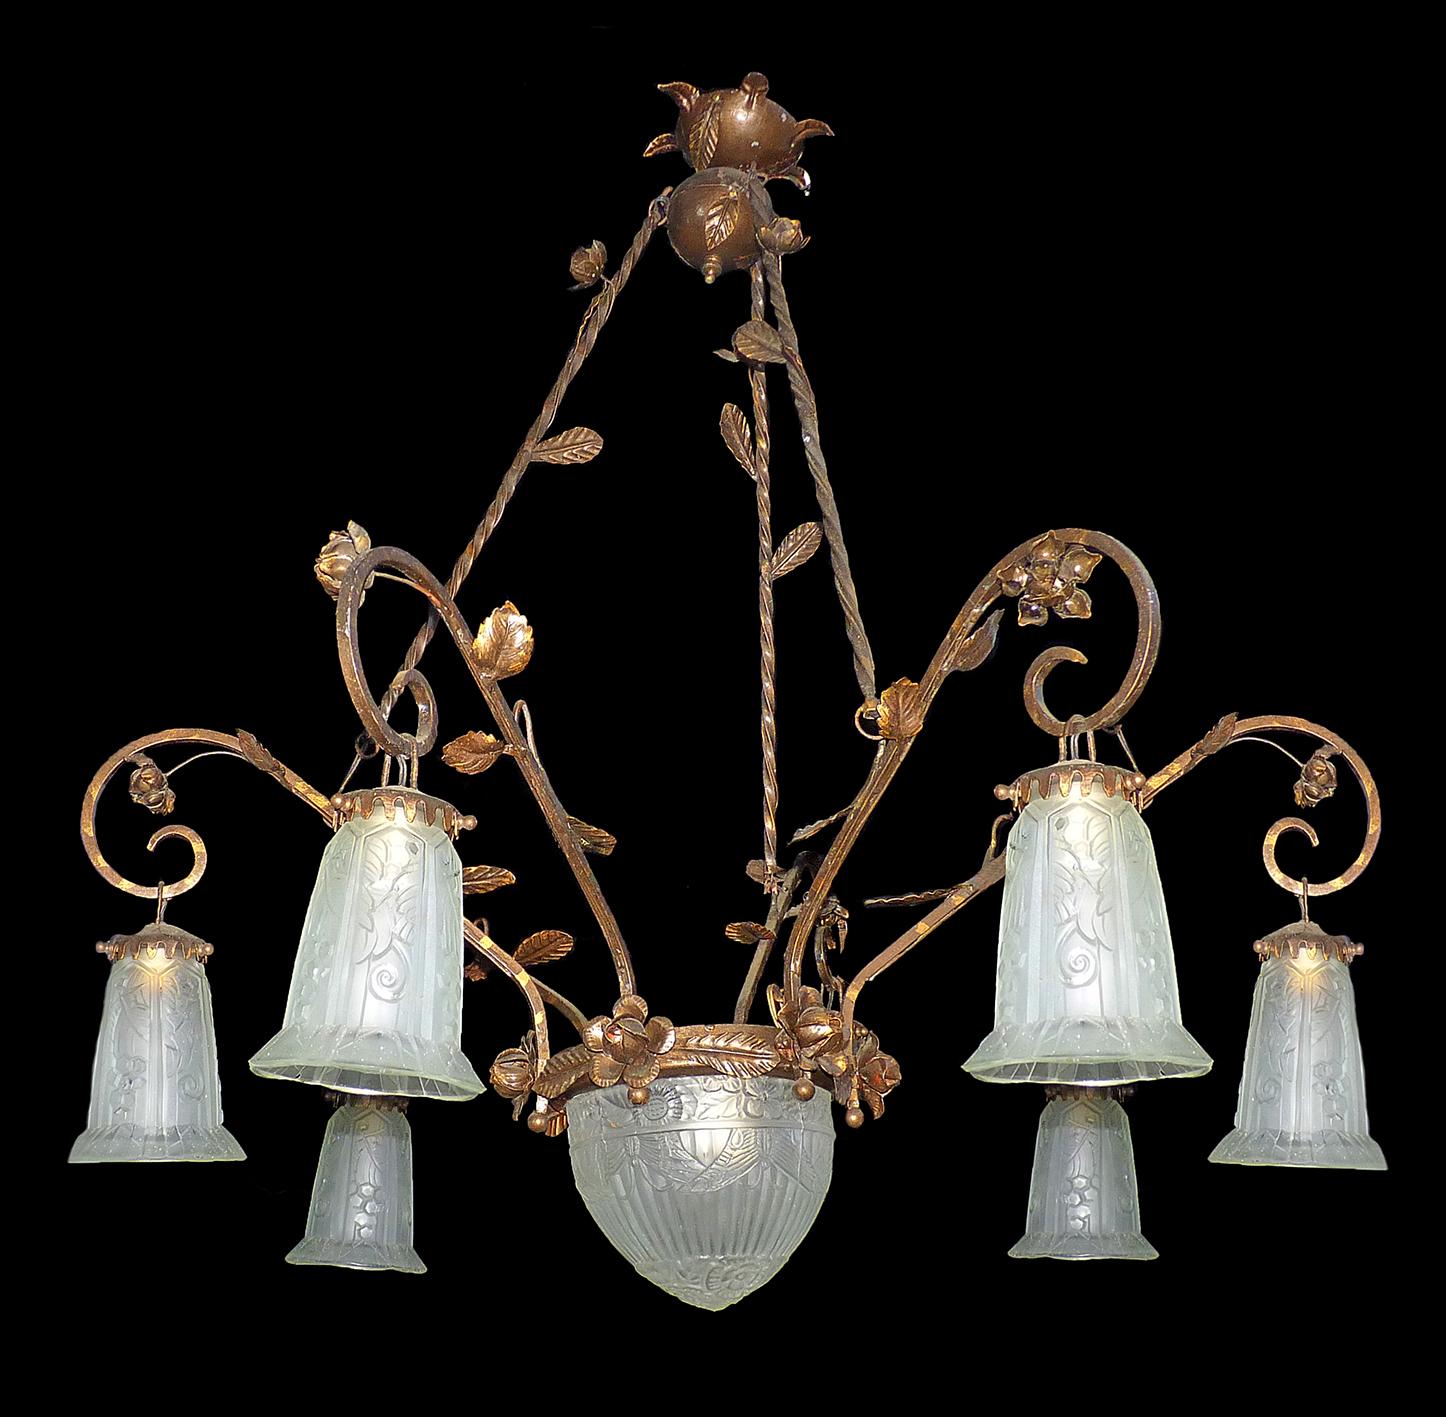 Beautiful French 1930 Art Deco chandelier or pendant. It features a hand forged wrought iron base with stylized leaf and flowers detailing, and floral shaped glass shades.
Measures:
Width 33 in / 84 cm
Height 35.4 in / 90 cm
Weight 20 lb. (9